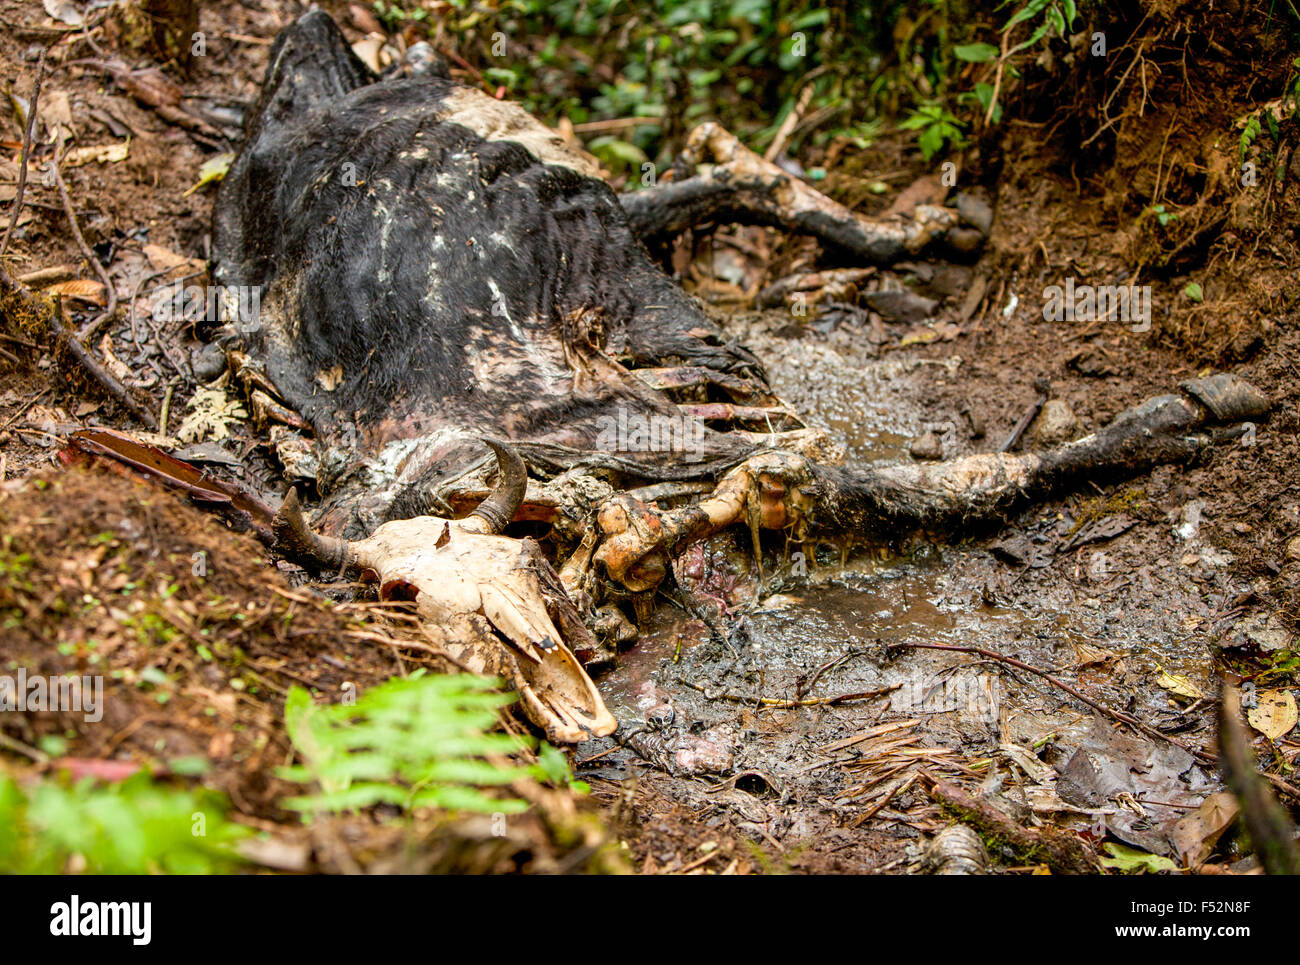 Animal Corpse In The Amazon Jungle Approx 2 Weeks From The Death Time Stock Photo